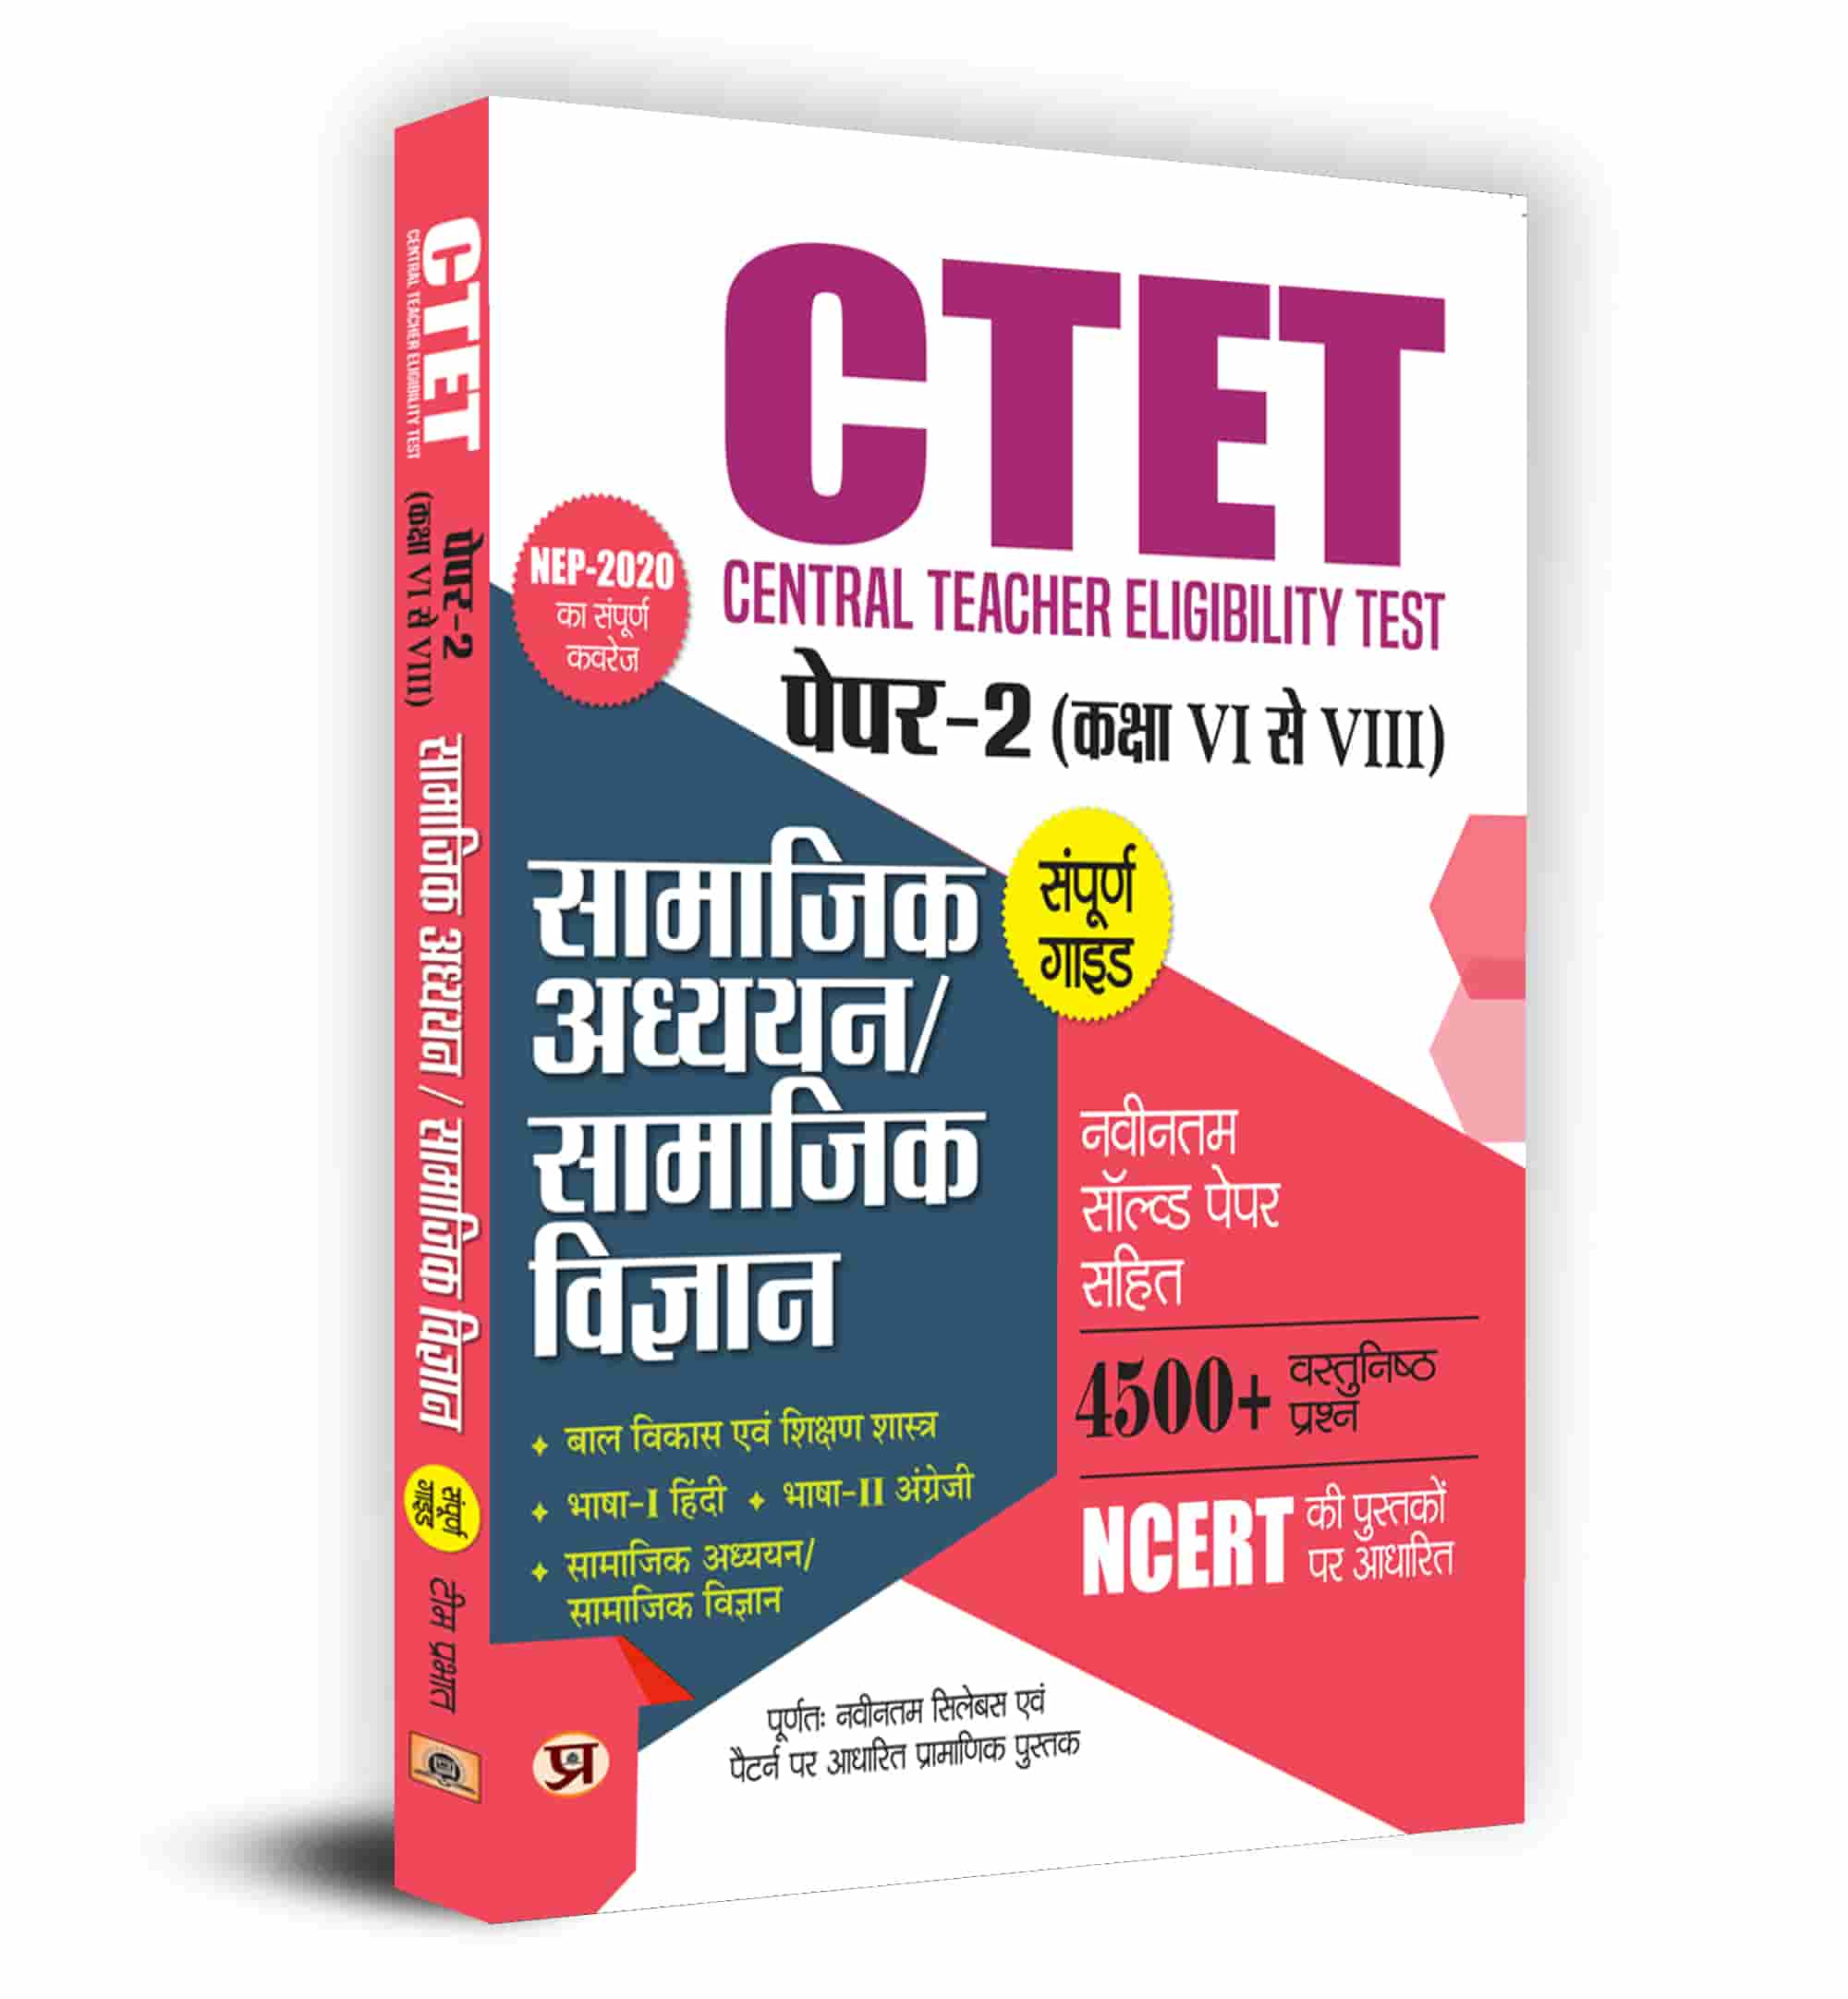 CTET Central Teacher Eligibility Test Paper-2 (Class Vi-Viii) Samajik Adhyayan/Samajik Vigyan (Social Science) Guide with Latest Solved Paper